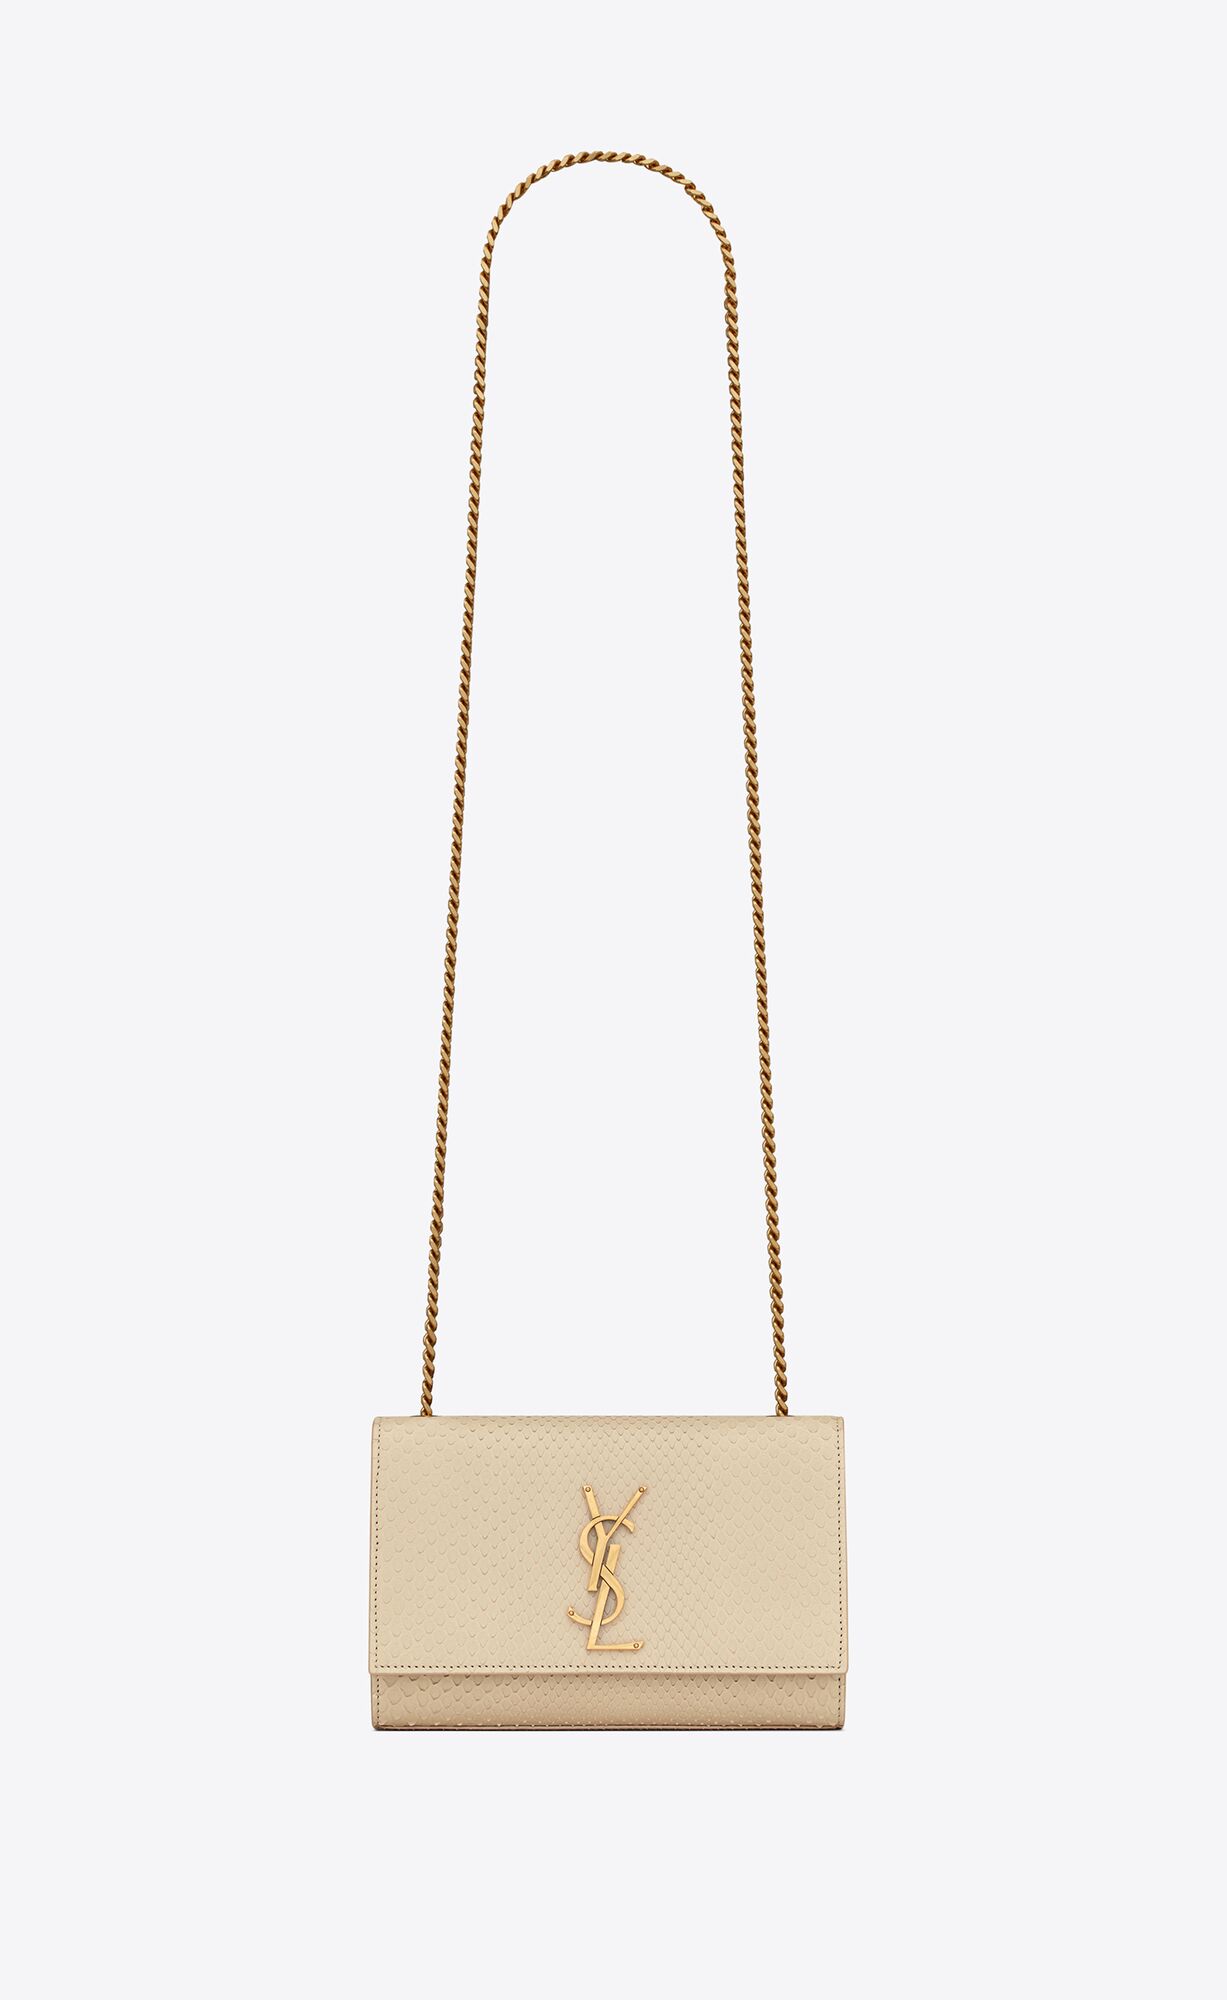 Saint Laurent Kate Small Chain Bag In Python – Light Ivoire – 469390EAAA89925